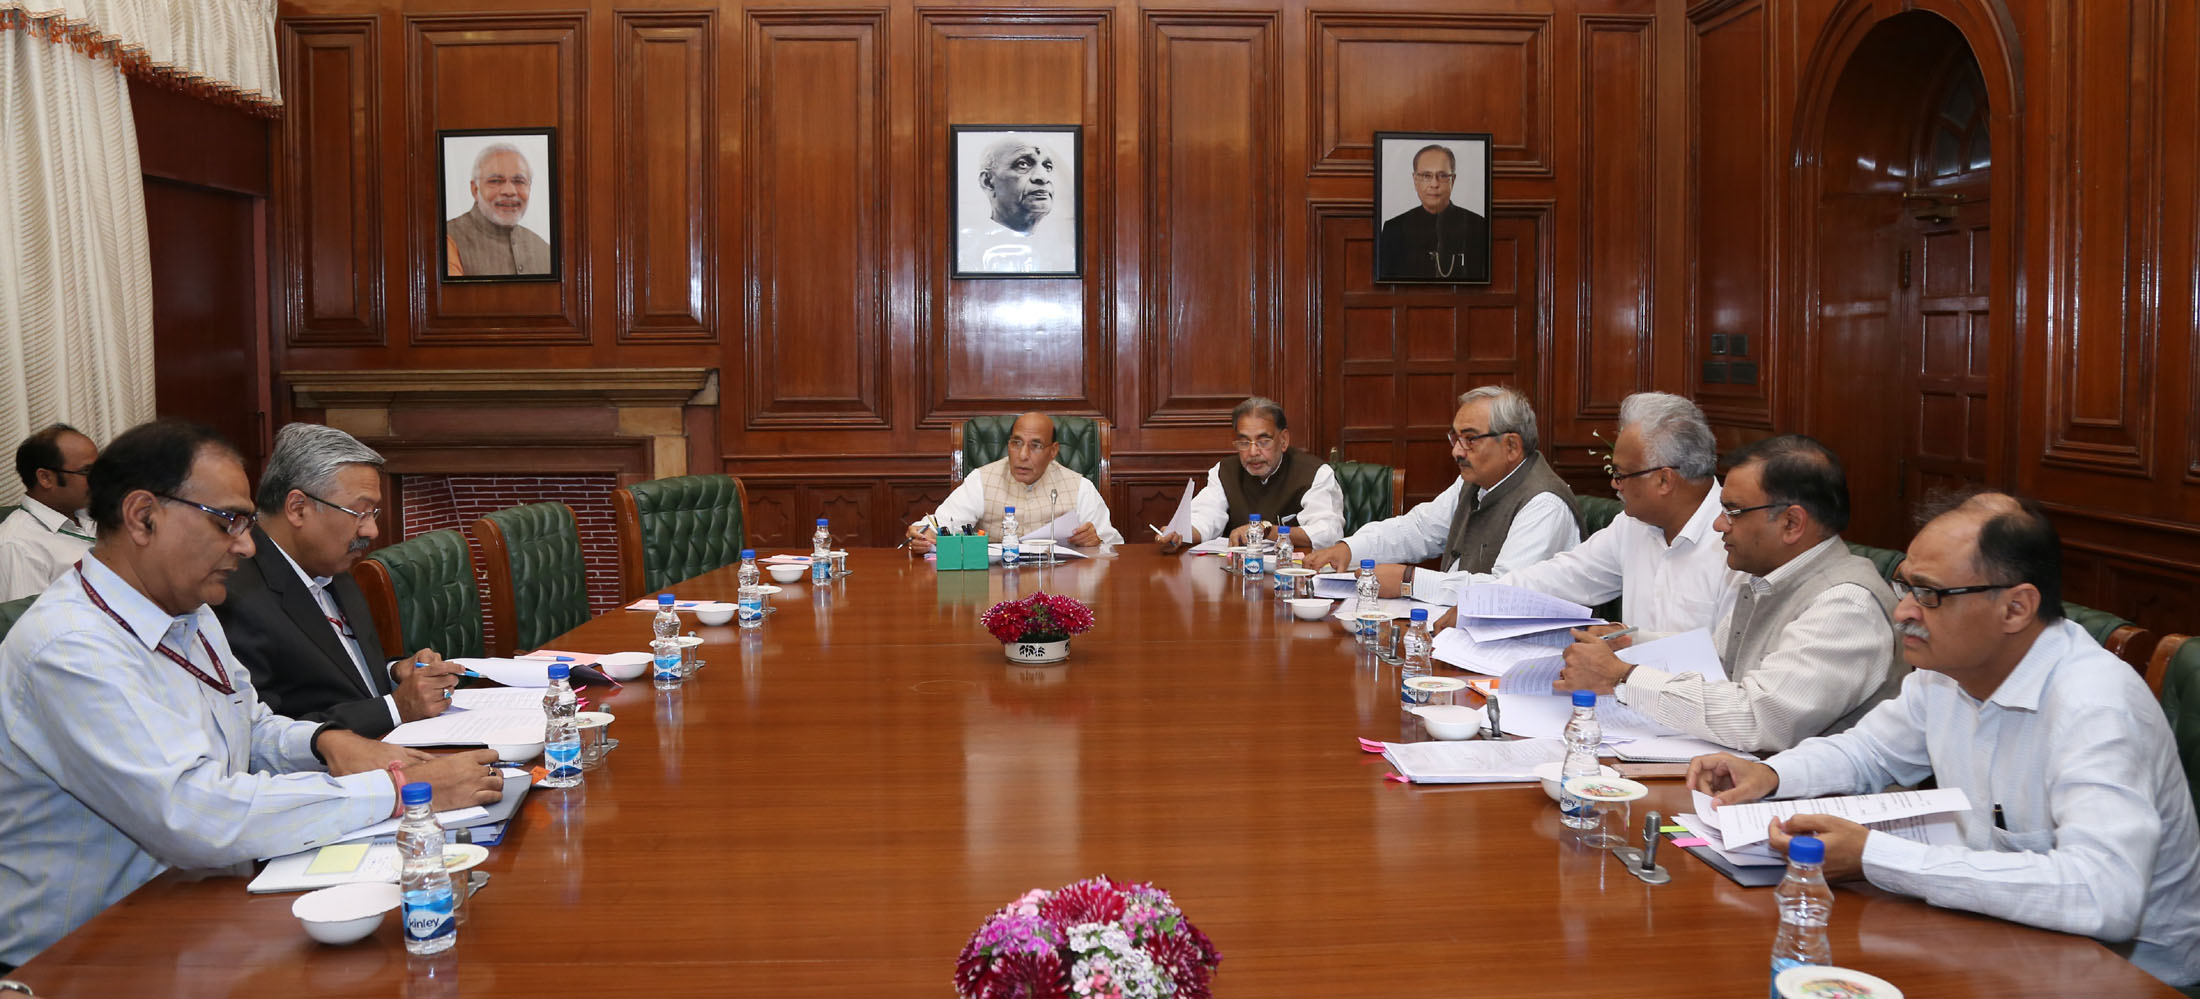 The Union Home Minister, Shri Rajnath Singh chairing a high level committee meeting for Central Assistance to States affected by natural disasters, in New Delhi on March 23, 2017. 	The Union Minister for Agriculture and Farmers Welfare, Shri Radha Mohan Singh, the Union Home Secretary, Shri Rajiv Mehrishi and senior officers are also seen.